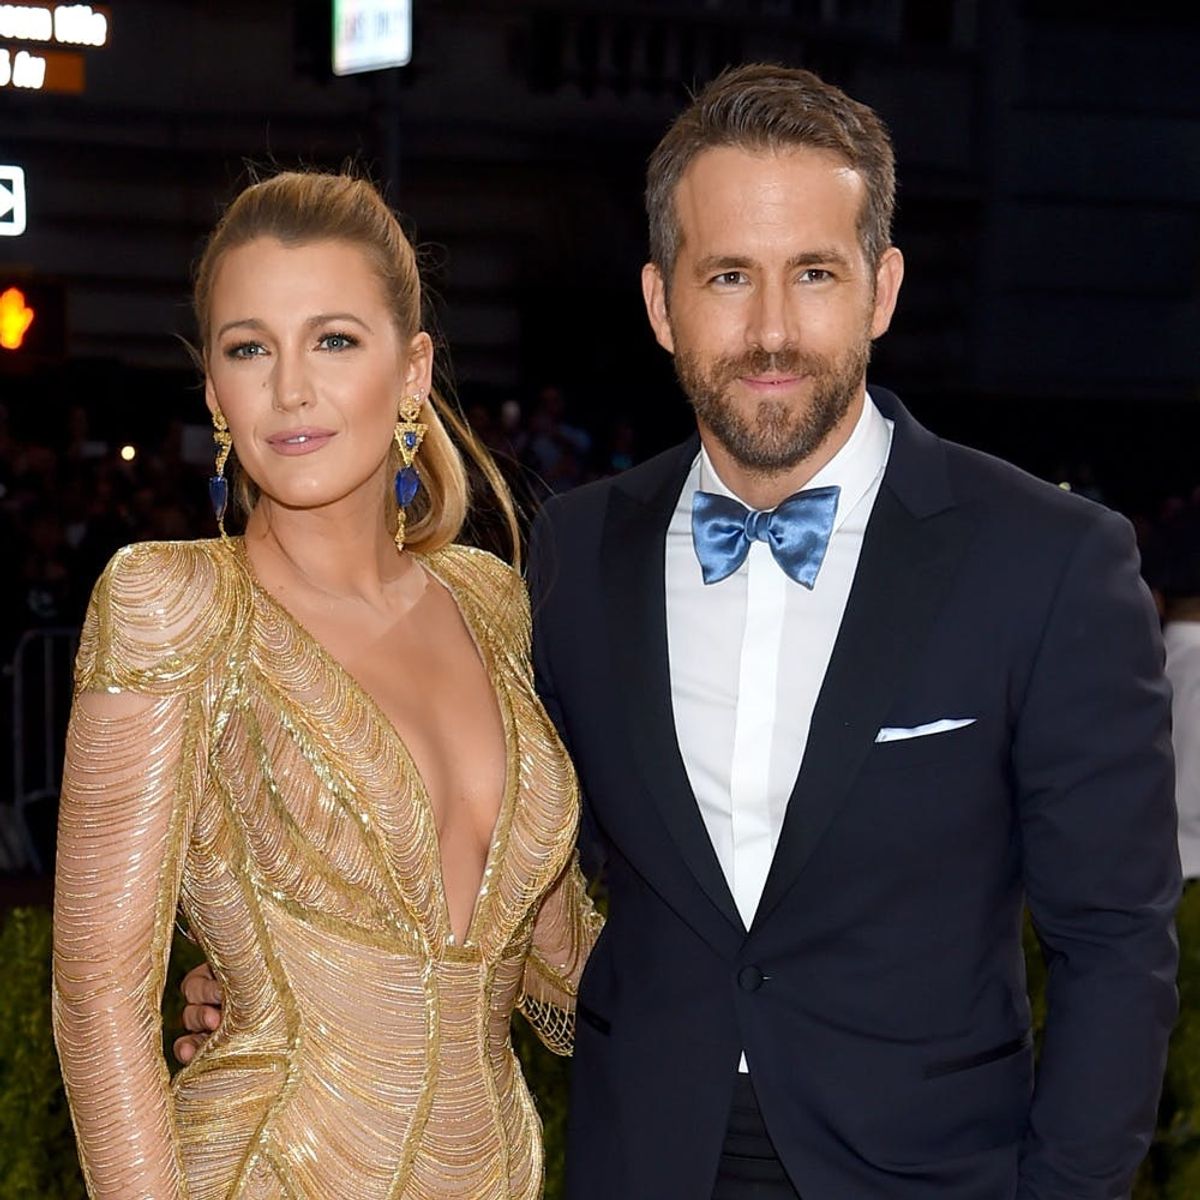 Ryan Reynolds Reveals to Humans of New York How Blake Lively Helped Him Deal With His Father’s Passing